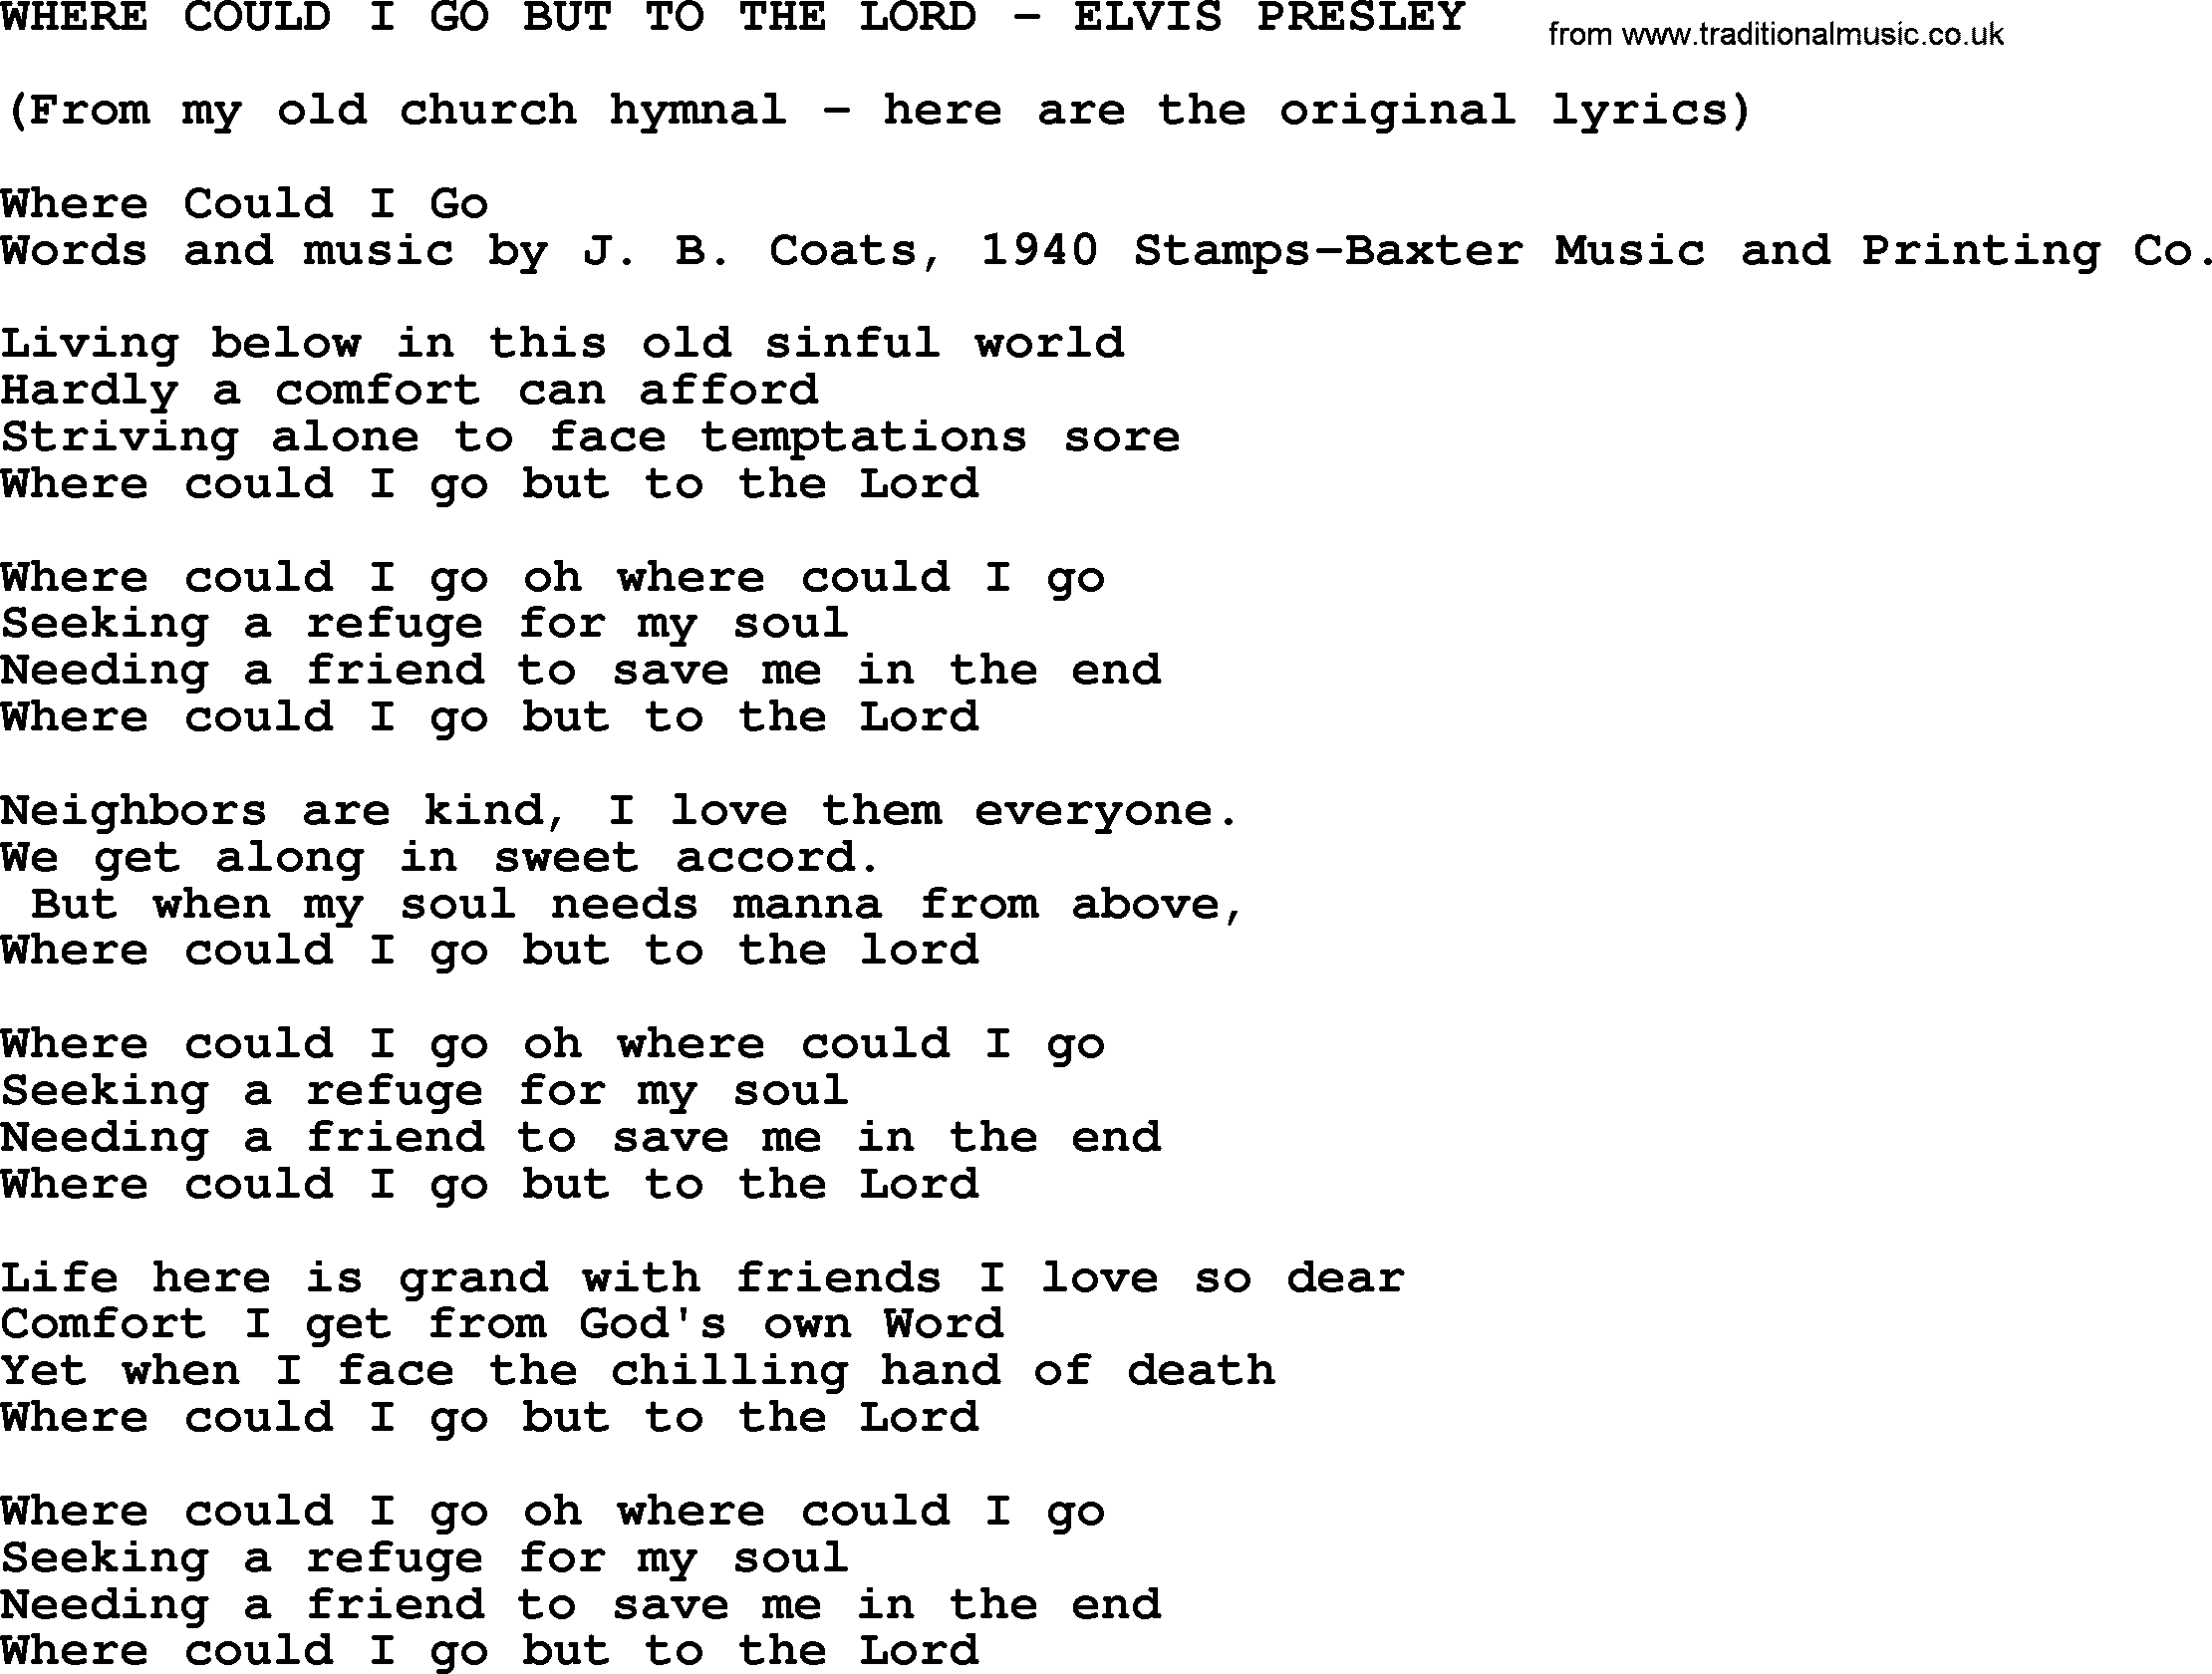 Elvis Presley song: Where Could I Go But To The Lord-Elvis Presley-.txt lyrics and chords